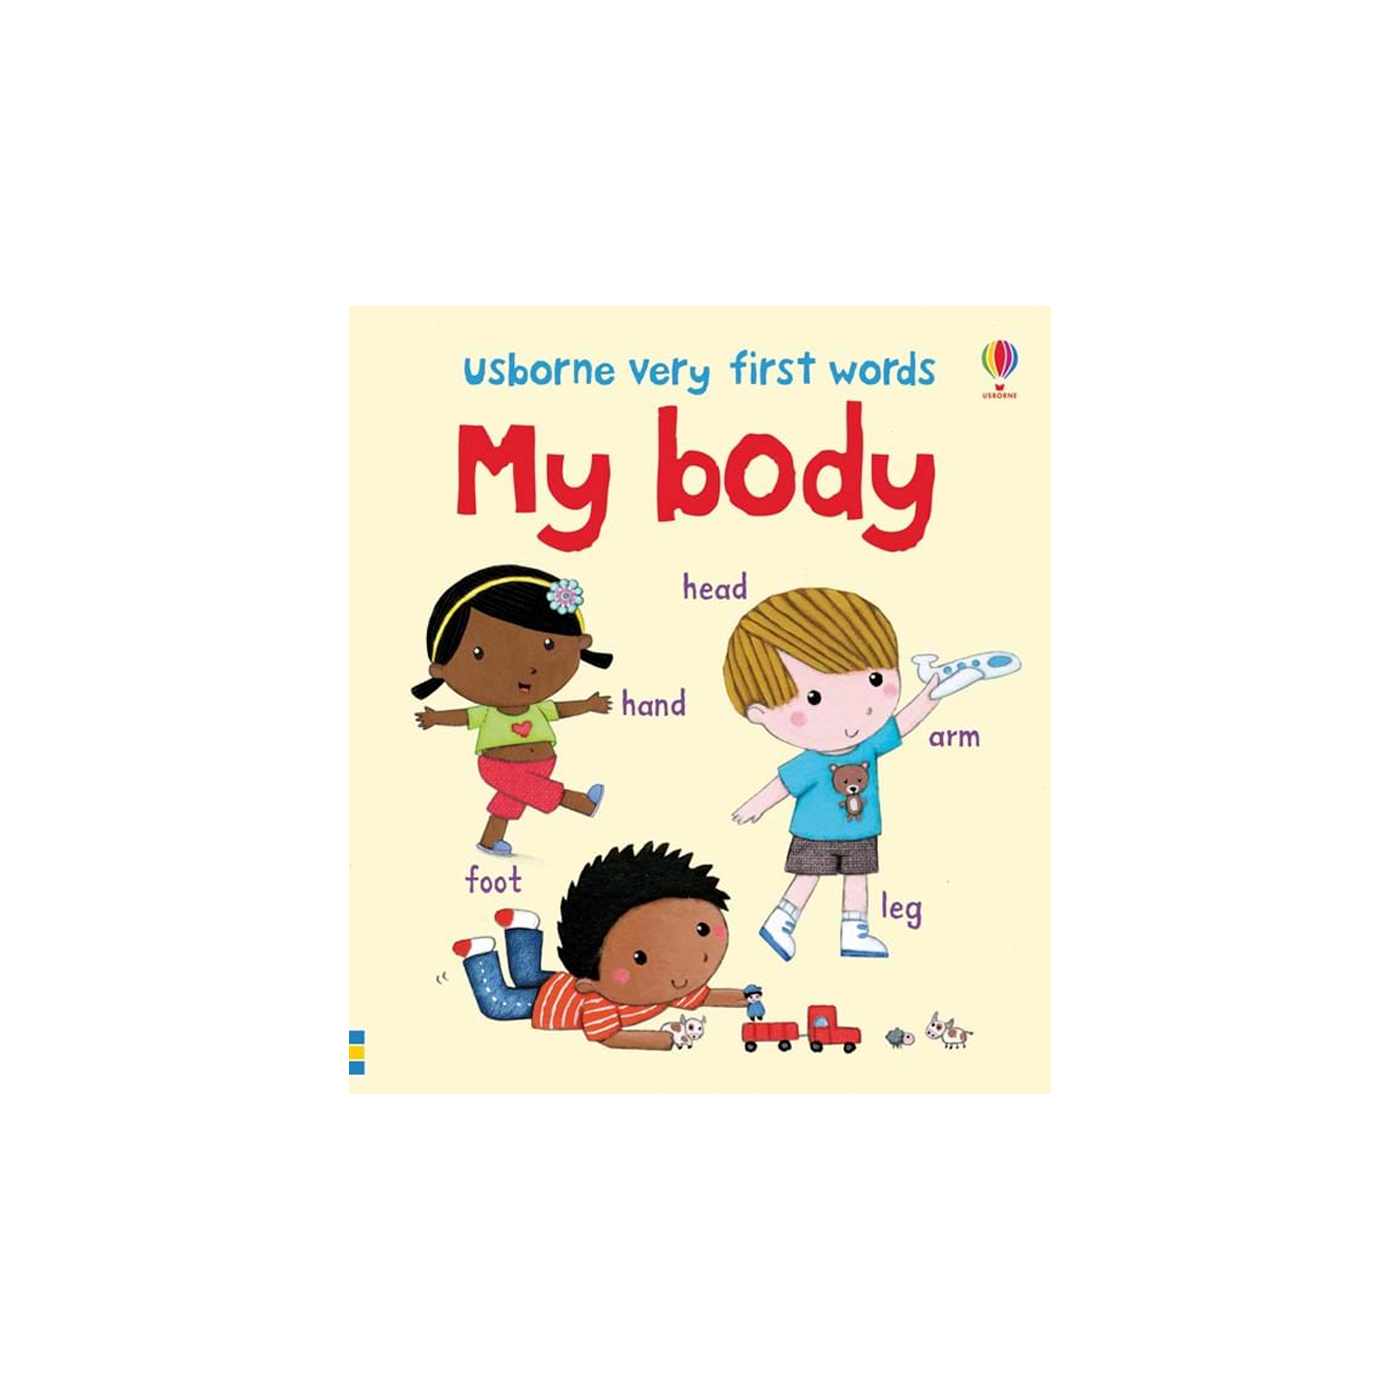  Very First Words: My body